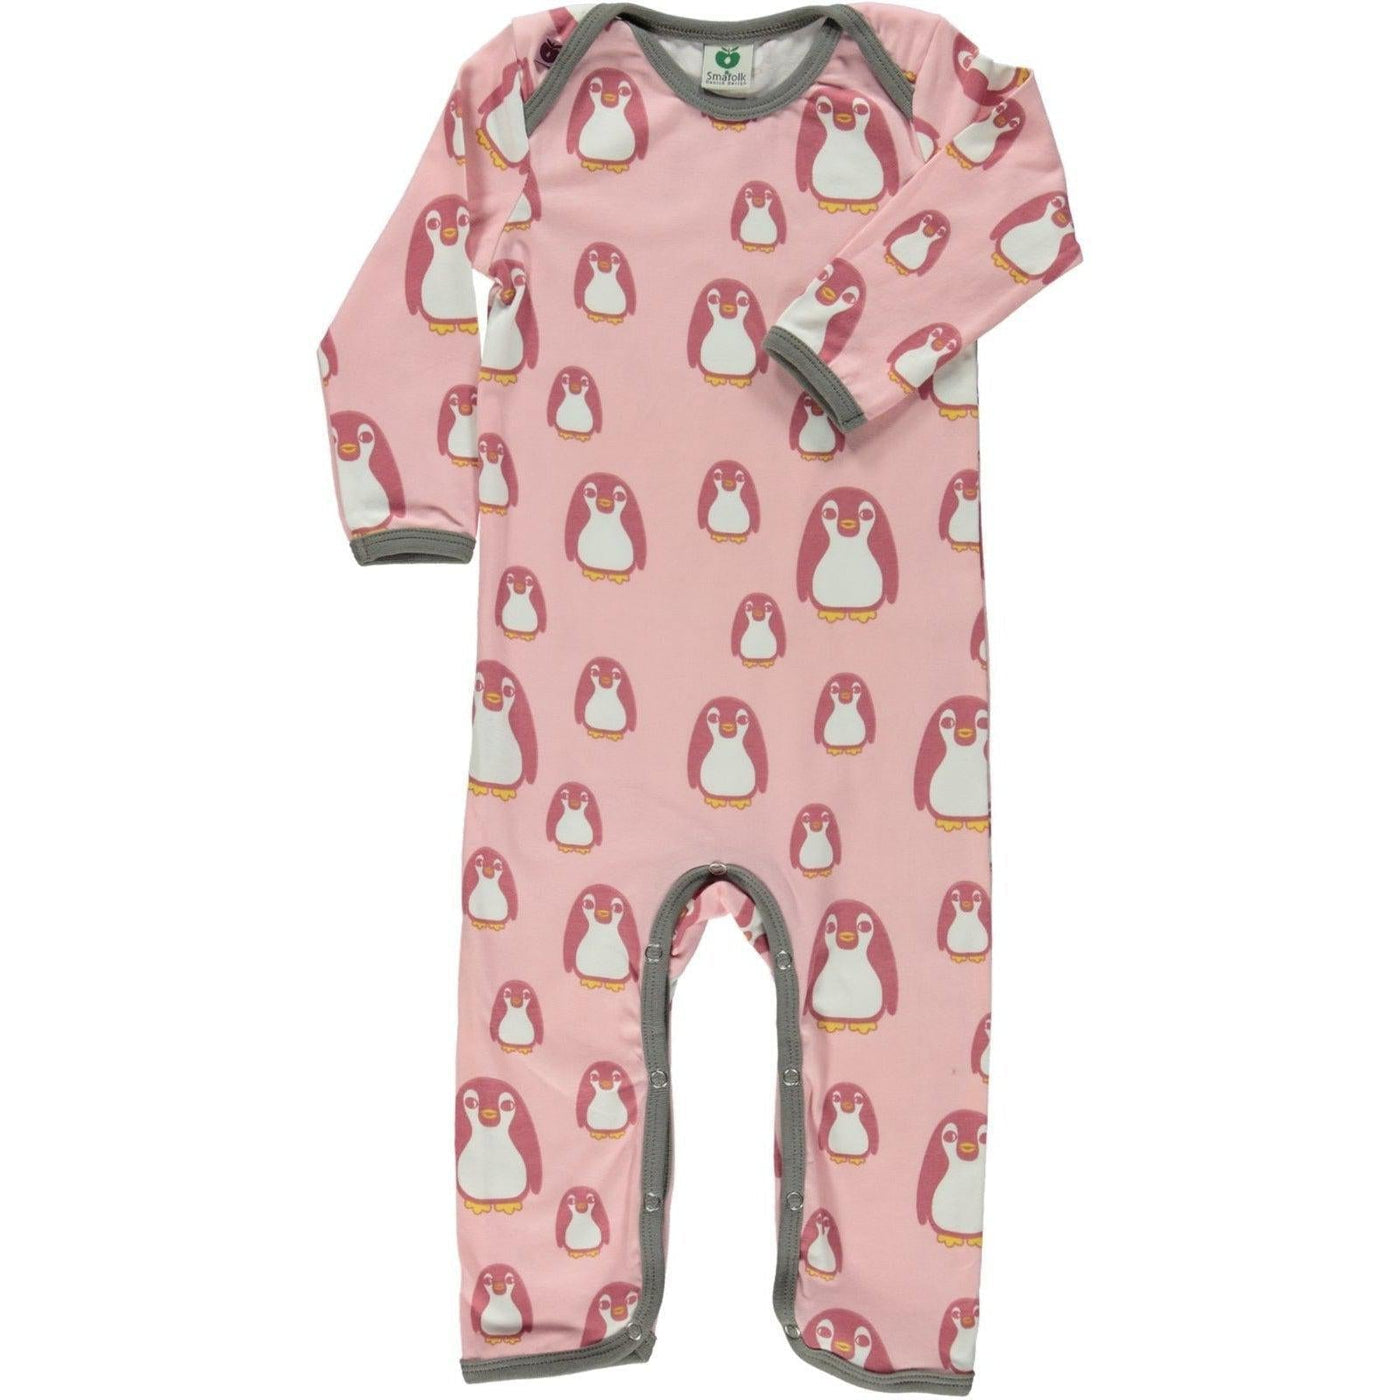 Smafolk ELTERN. Body suit with baby penguin - Bridal Rose